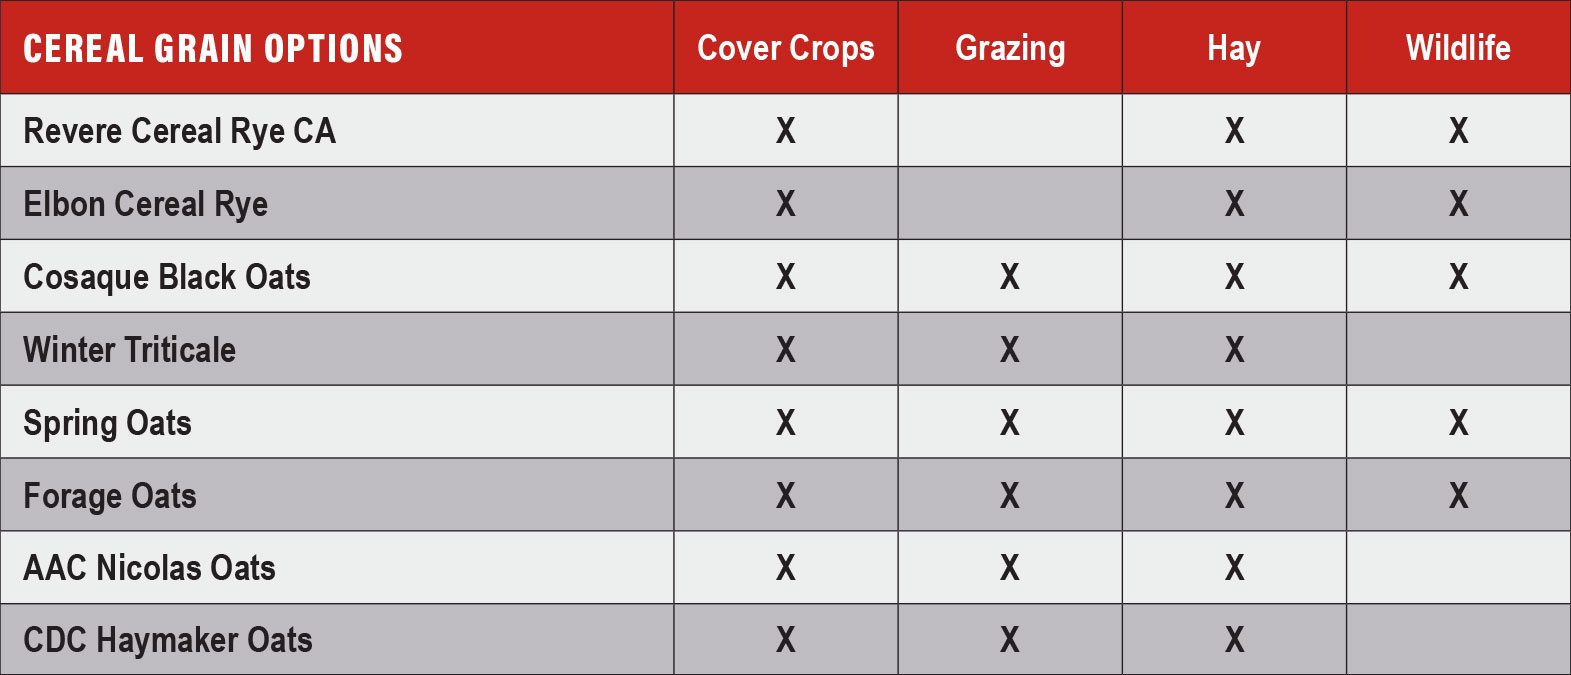 Small Seed - Cereal Grain Options